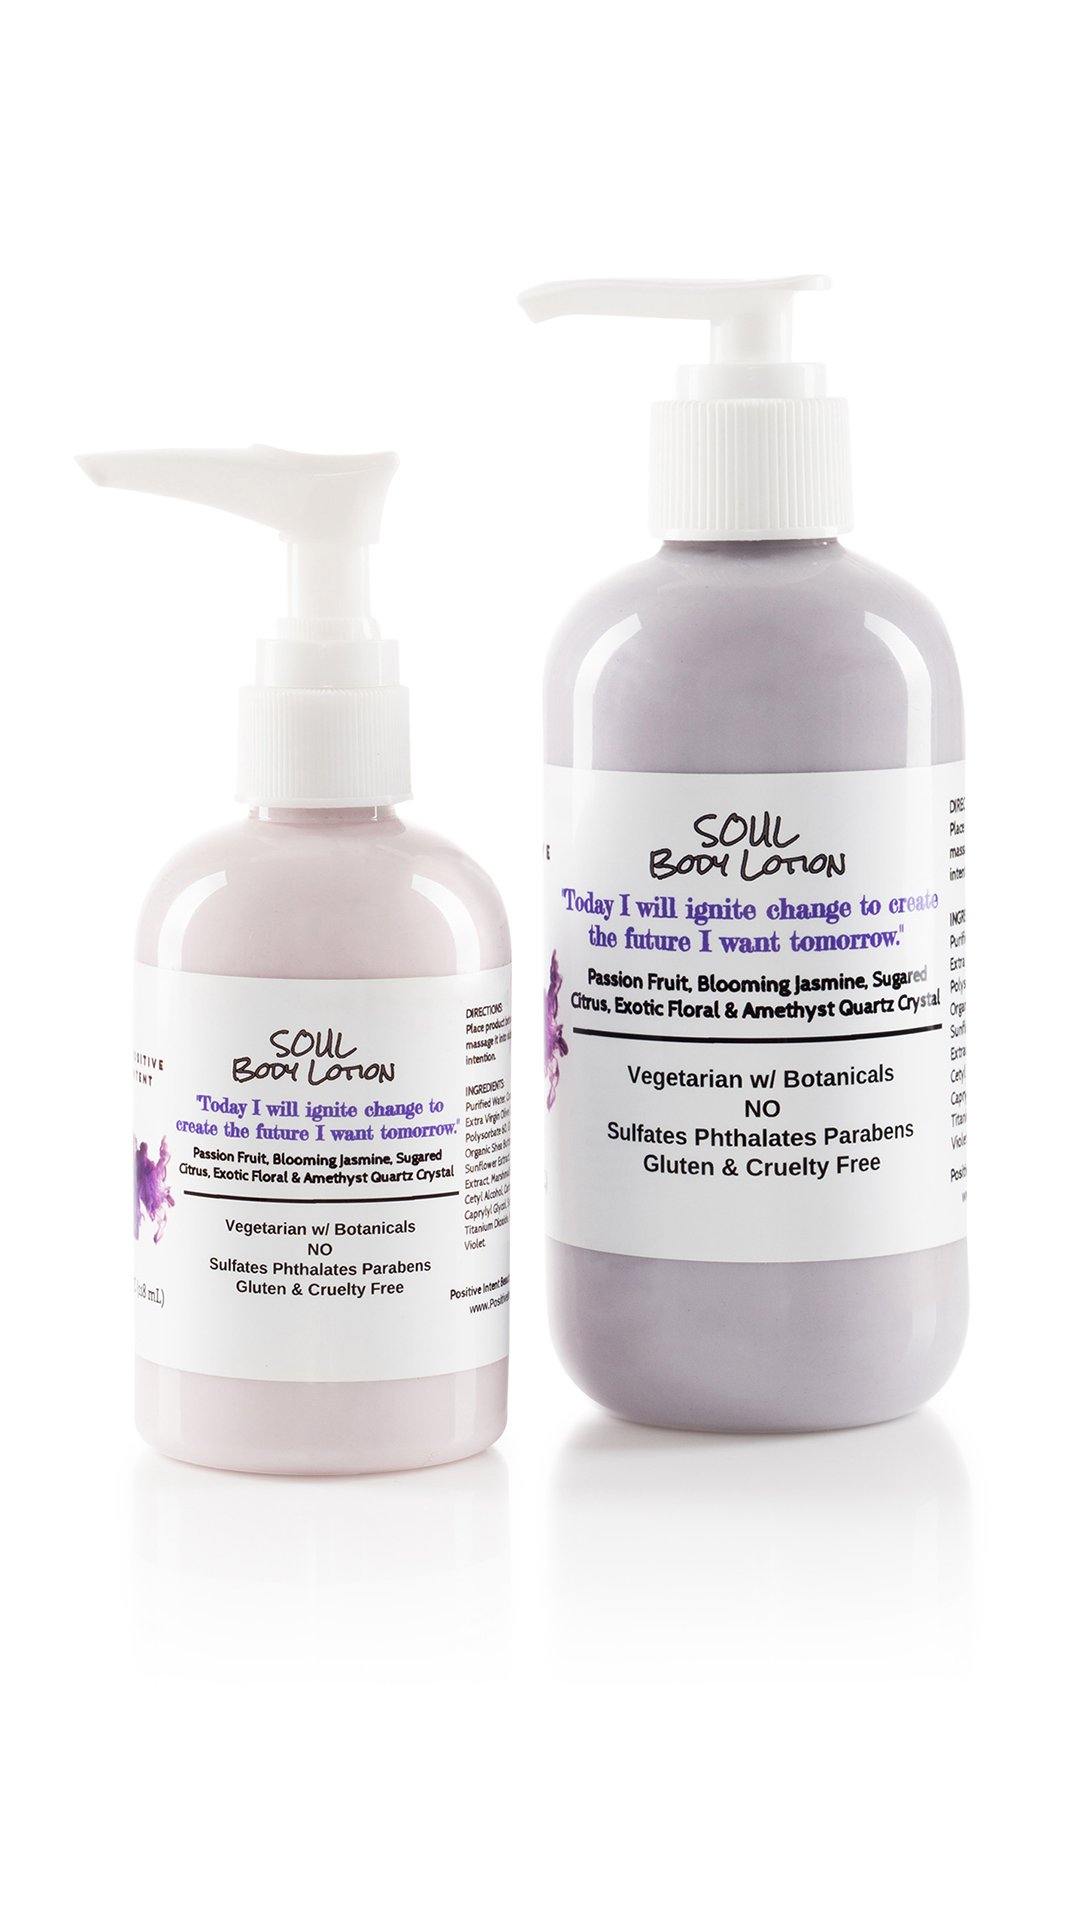 Learn how our SOUL Body Lotion transformed the life of KATHERINE in 30 days. - Positive Intent 